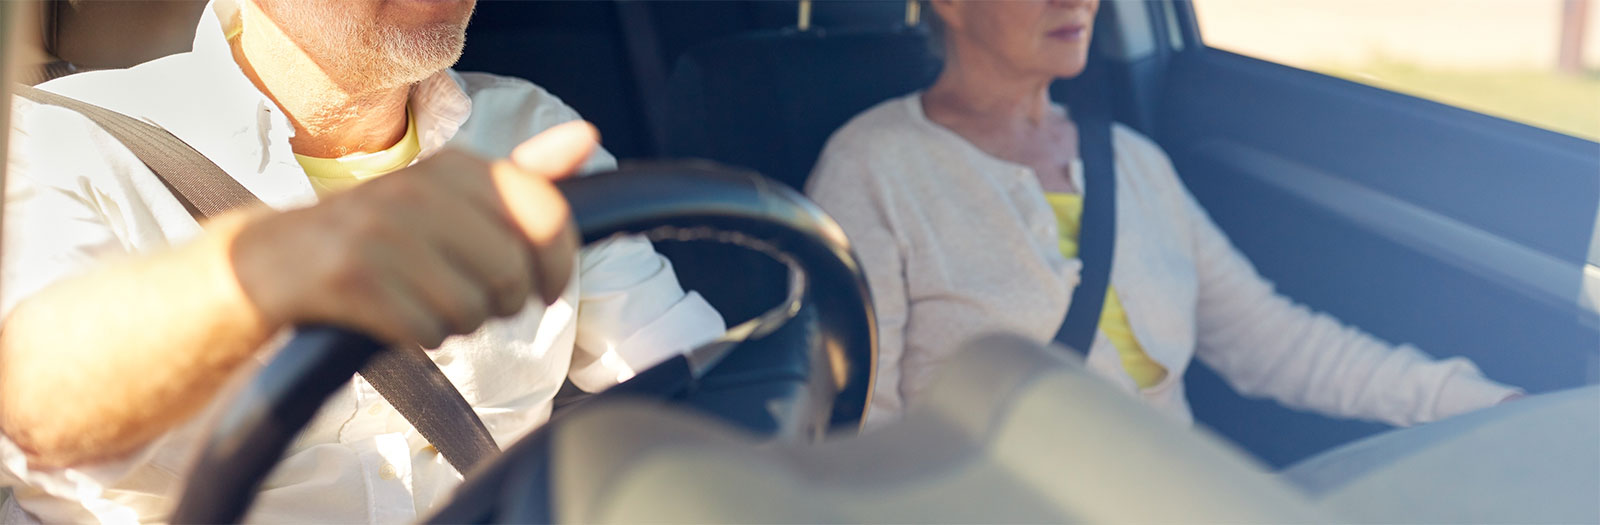 Close up of older man driving with a woman passenger